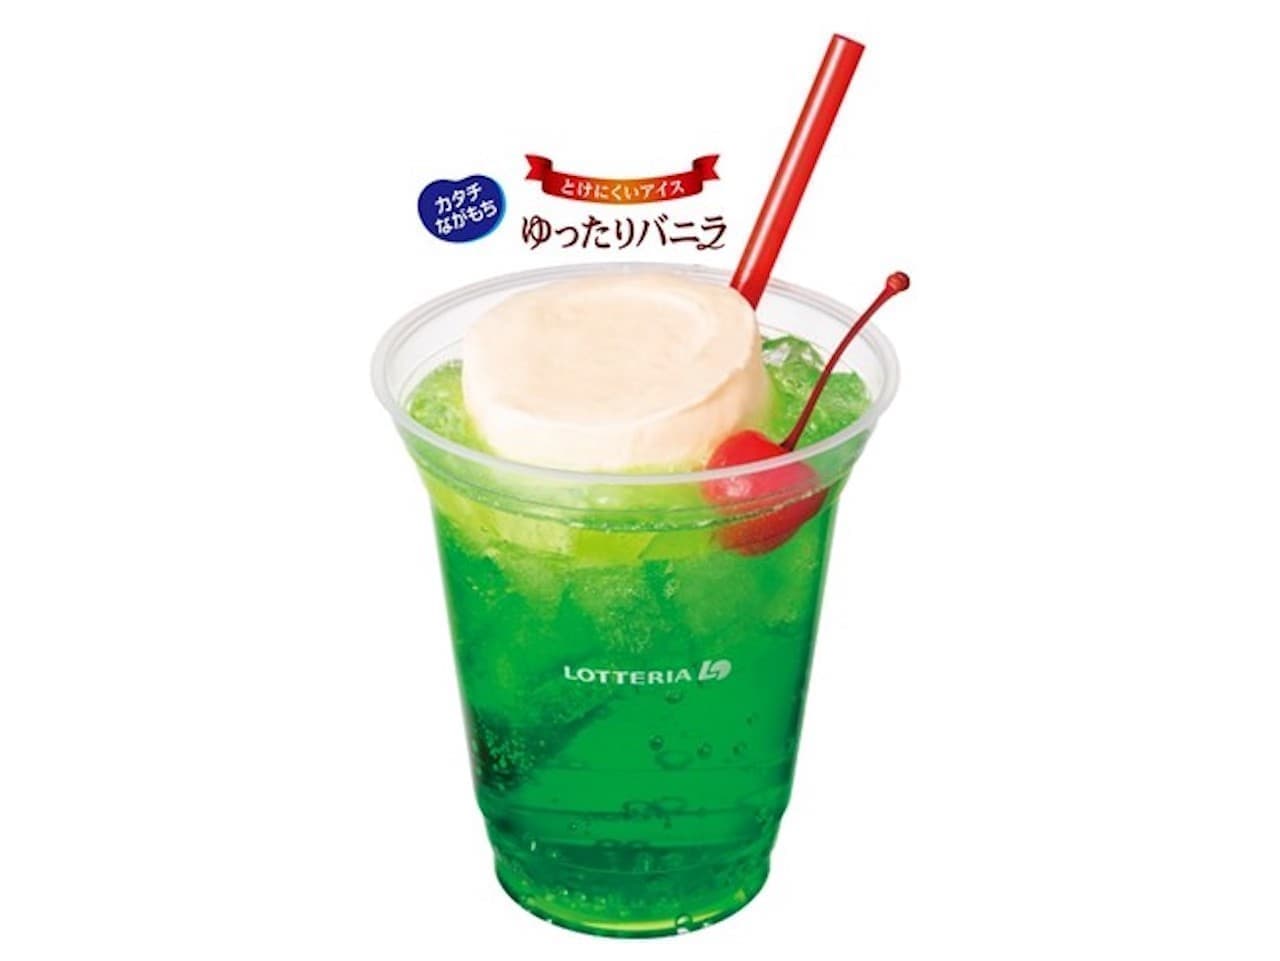 Lotteria Delivery Dedicated "Delivery Cream Soda" for a limited time